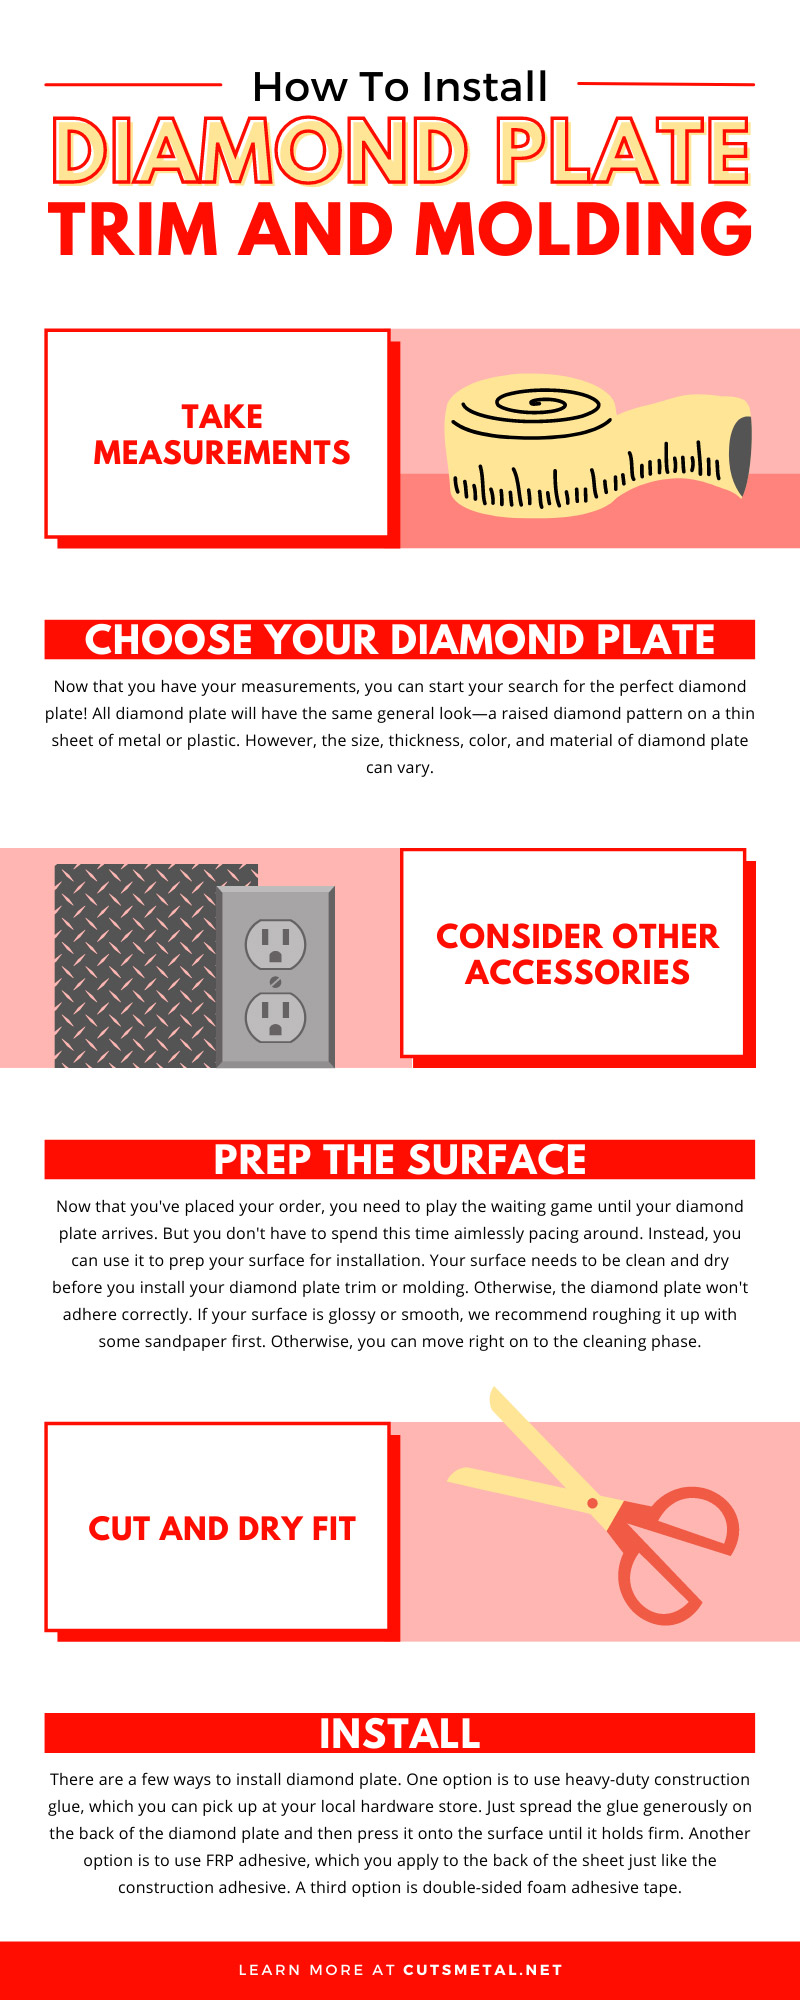 How To Install Diamond Plate Trim and Molding